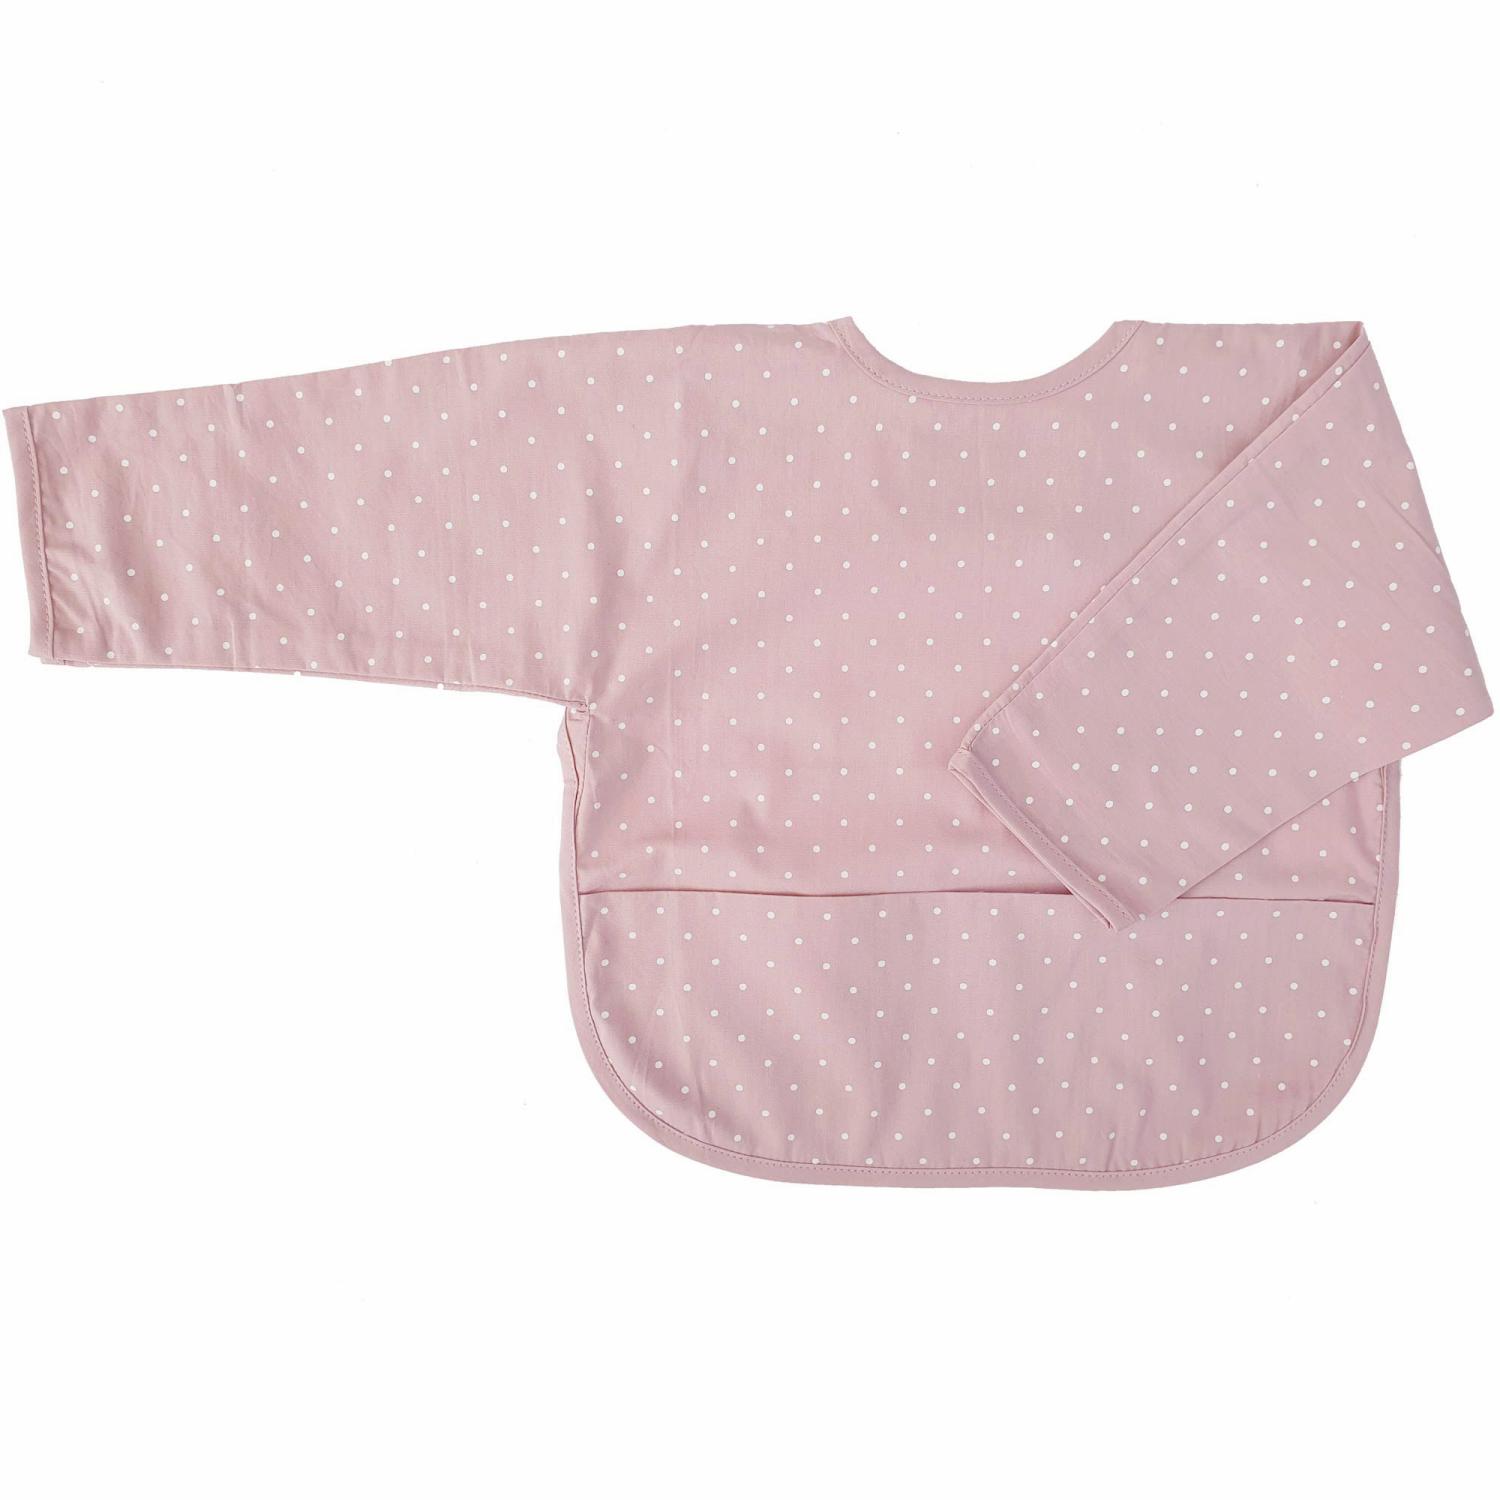 Bib with sleeves pale pink dotty eco